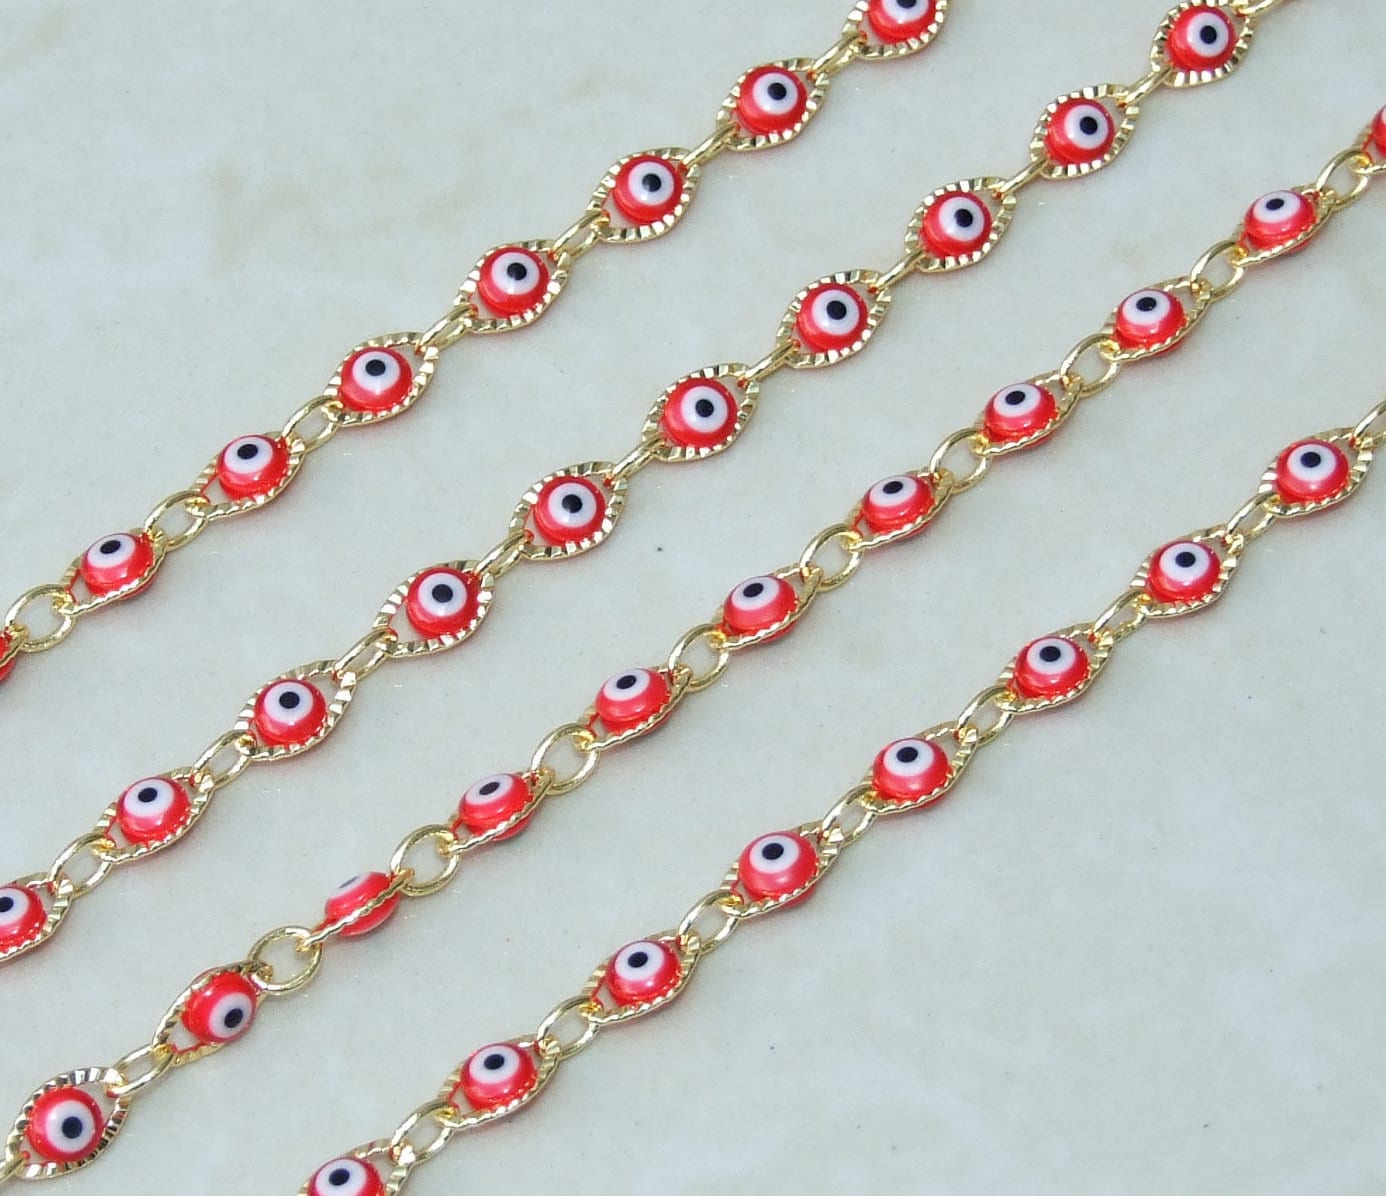 Red Glass Evil Eye Rosary Chain, Bulk Chain, Marquee Bead, Beaded Chain, Body Chain Jewelry, Gold Chain, Necklace Chain, Belly Chain